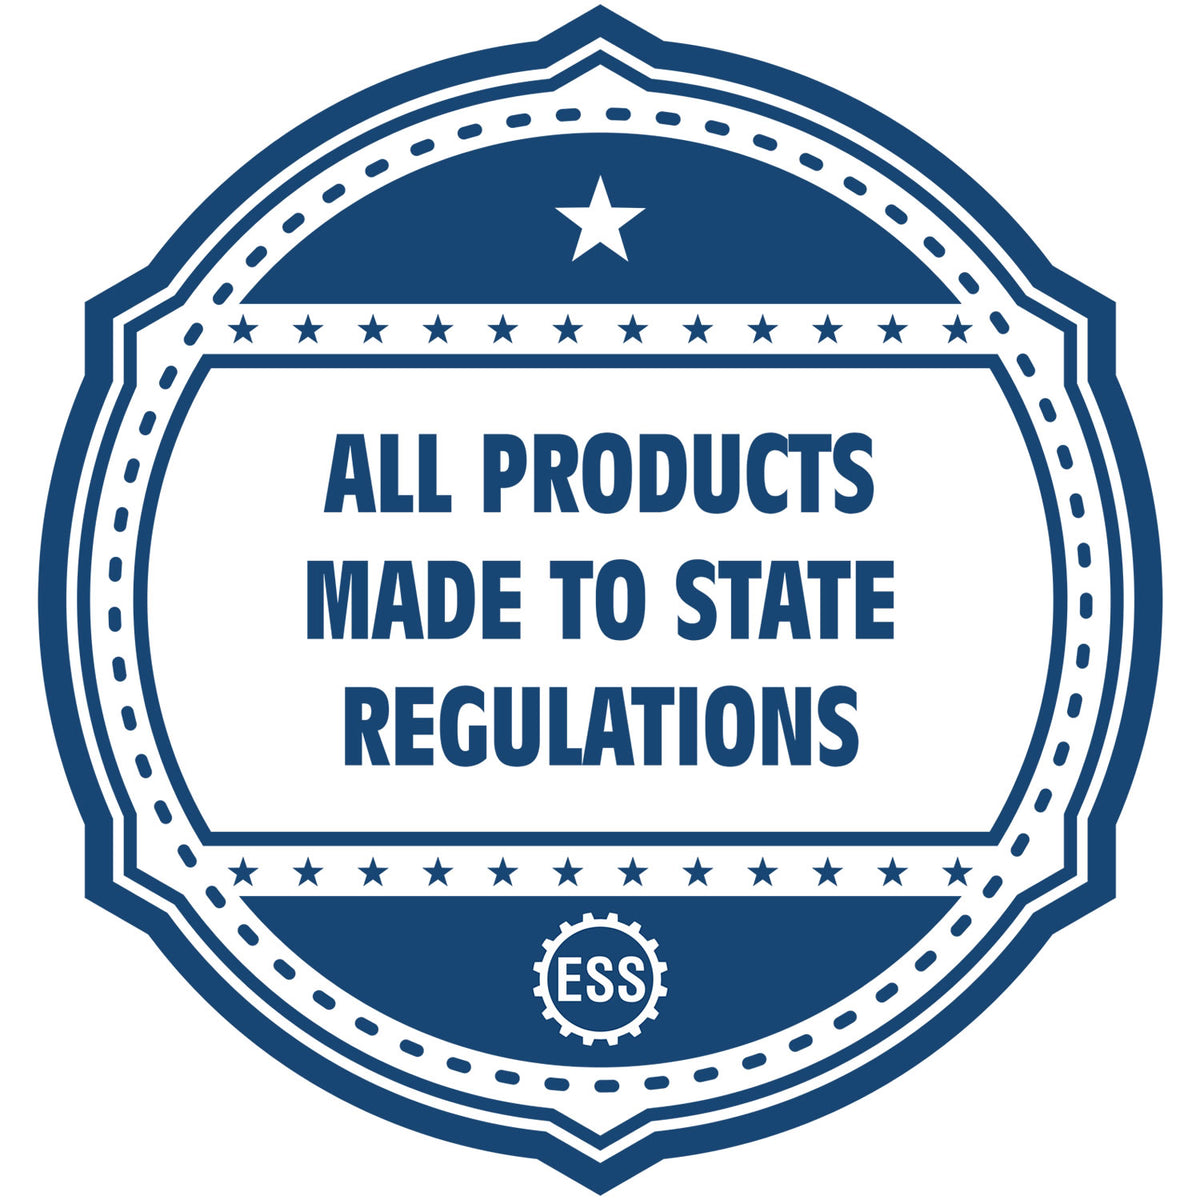 An icon or badge element for the Self-Inking State Seal Ohio Notary Stamp showing that this product is made in compliance with state regulations.